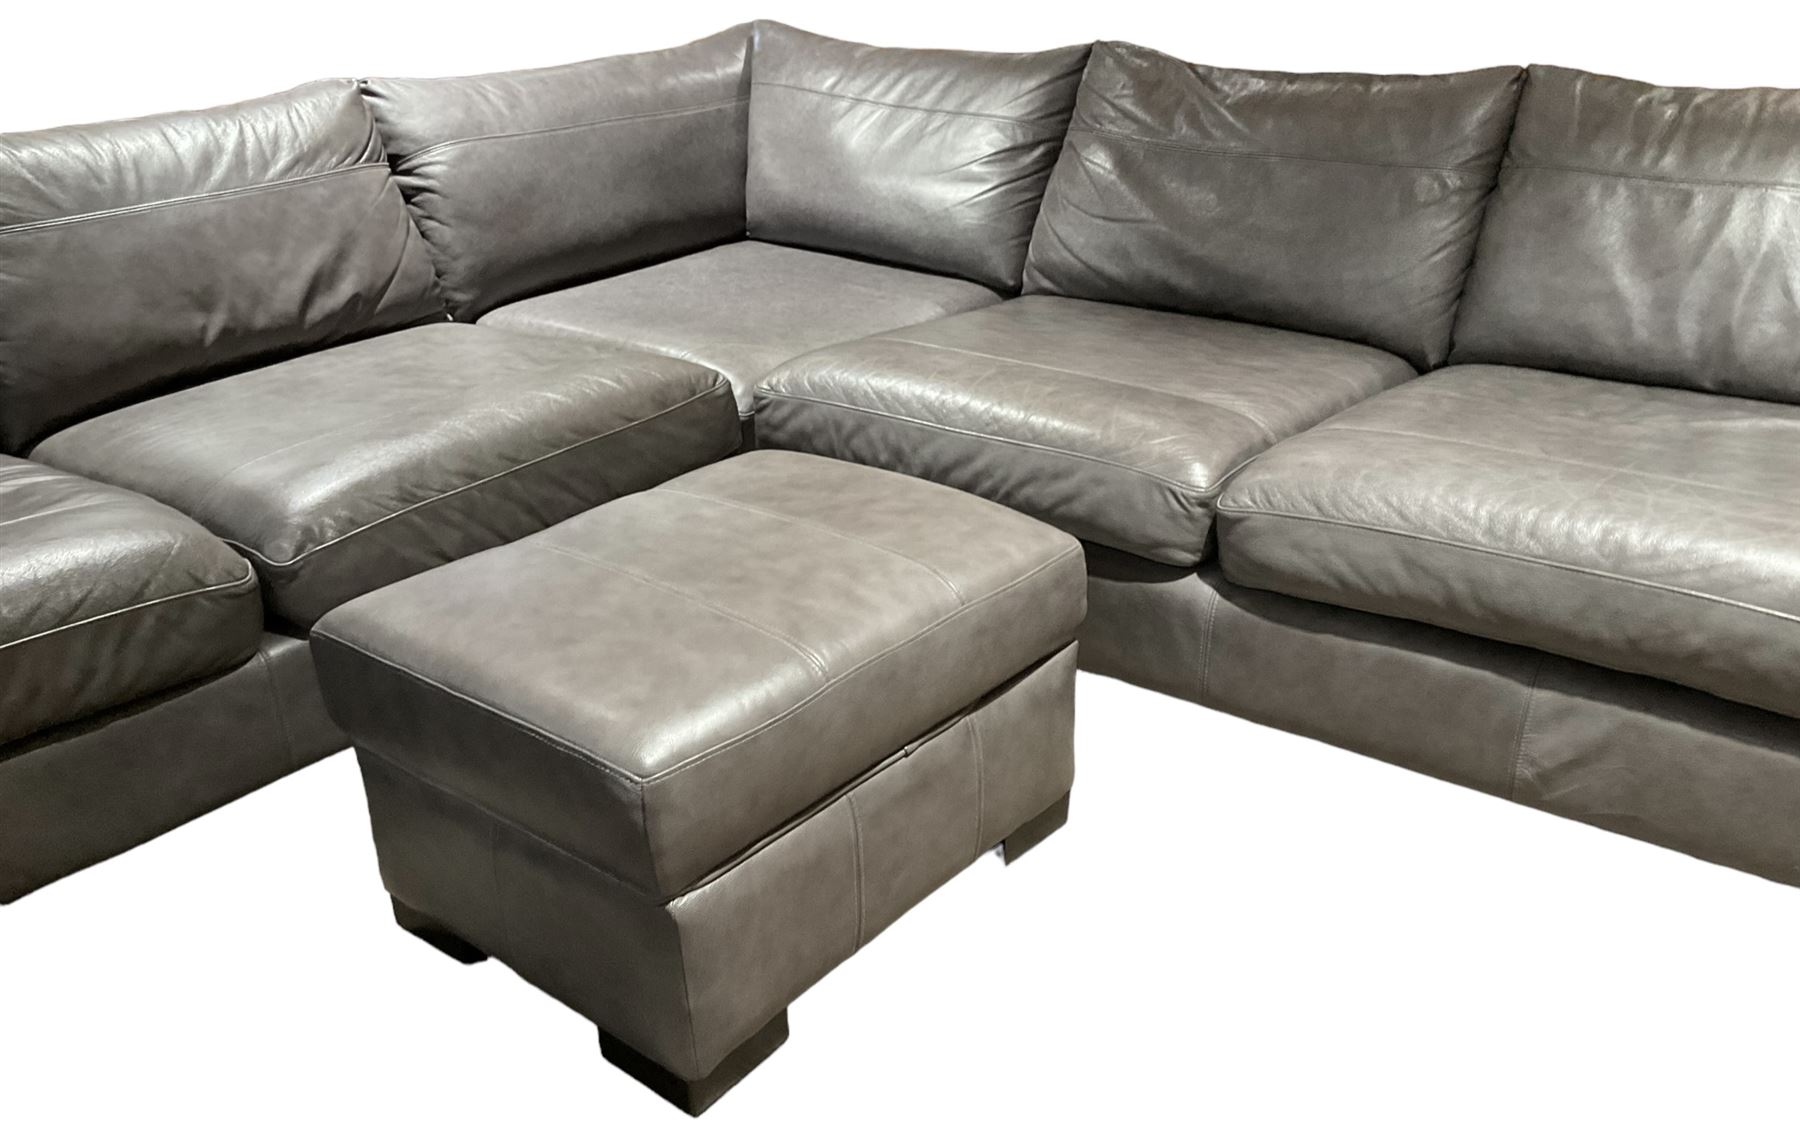 Sofa Workshop - five-seat corner sofa; matching footstool; upholstered in Italian grey leather - Image 3 of 7